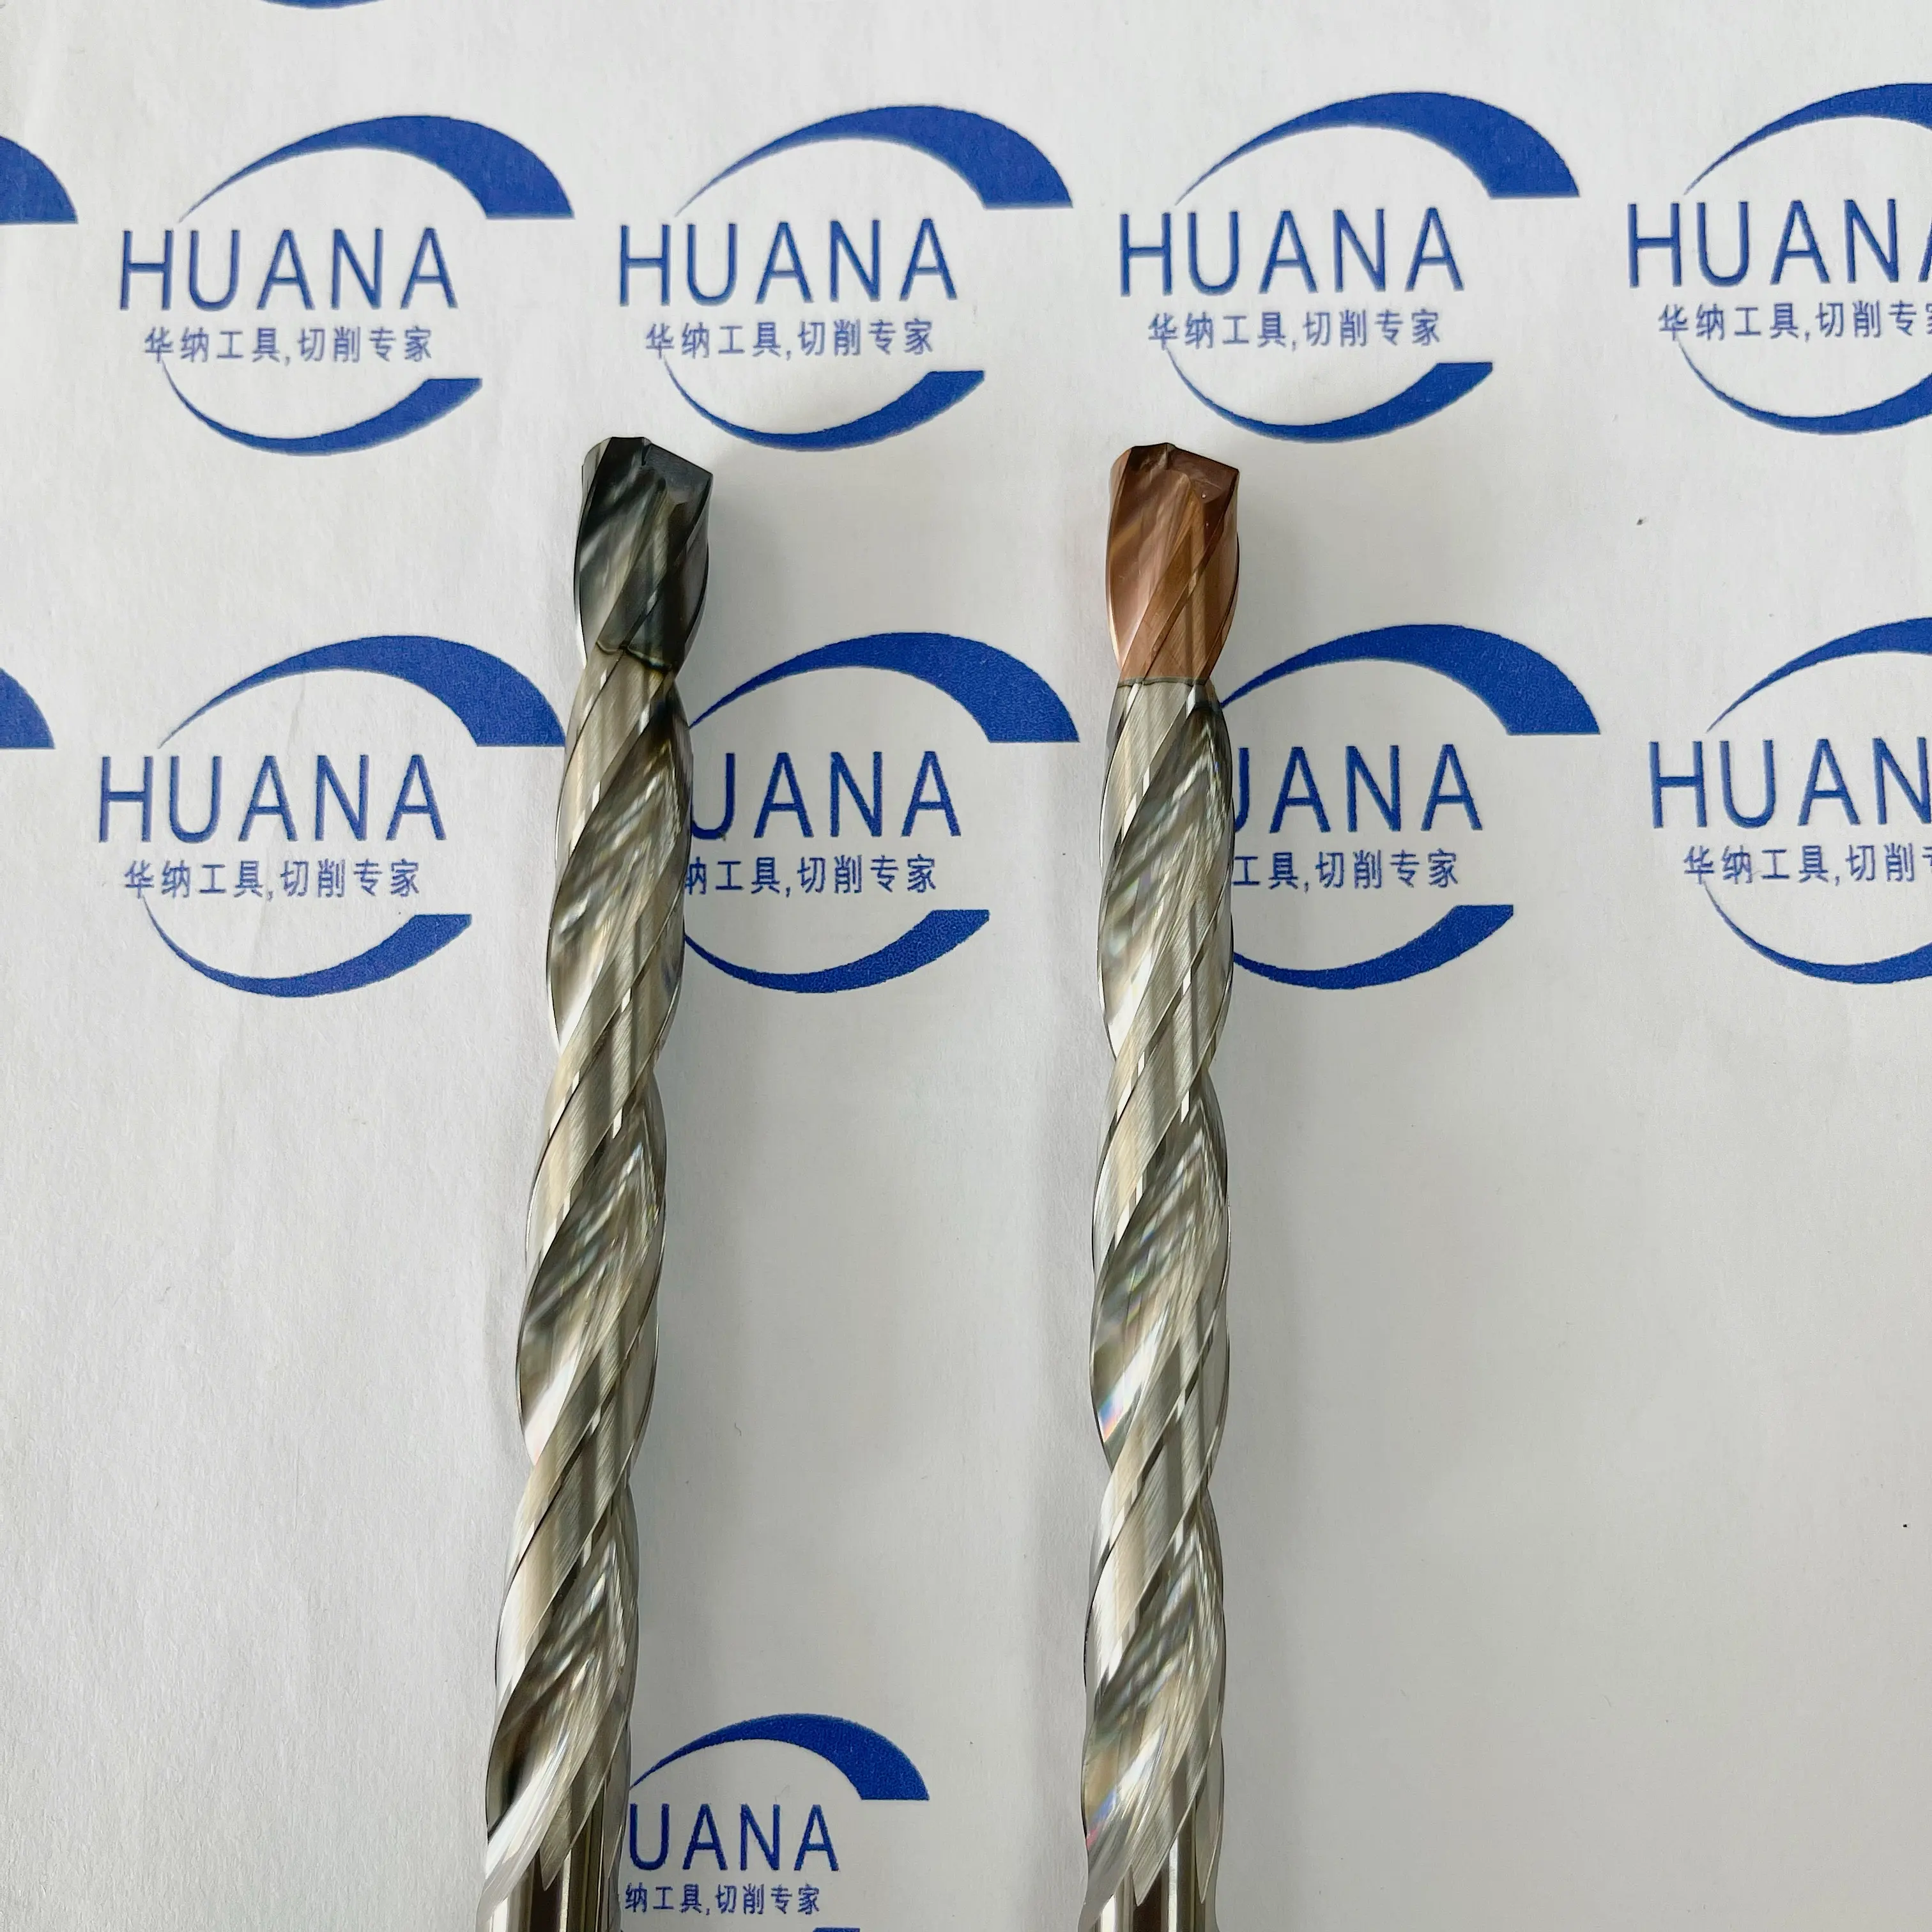 HUANA Carbide Deep Hole Drill Bit 10XD Carbide For Steel With Cooling Hole For 8.5-12.5mm Diameter